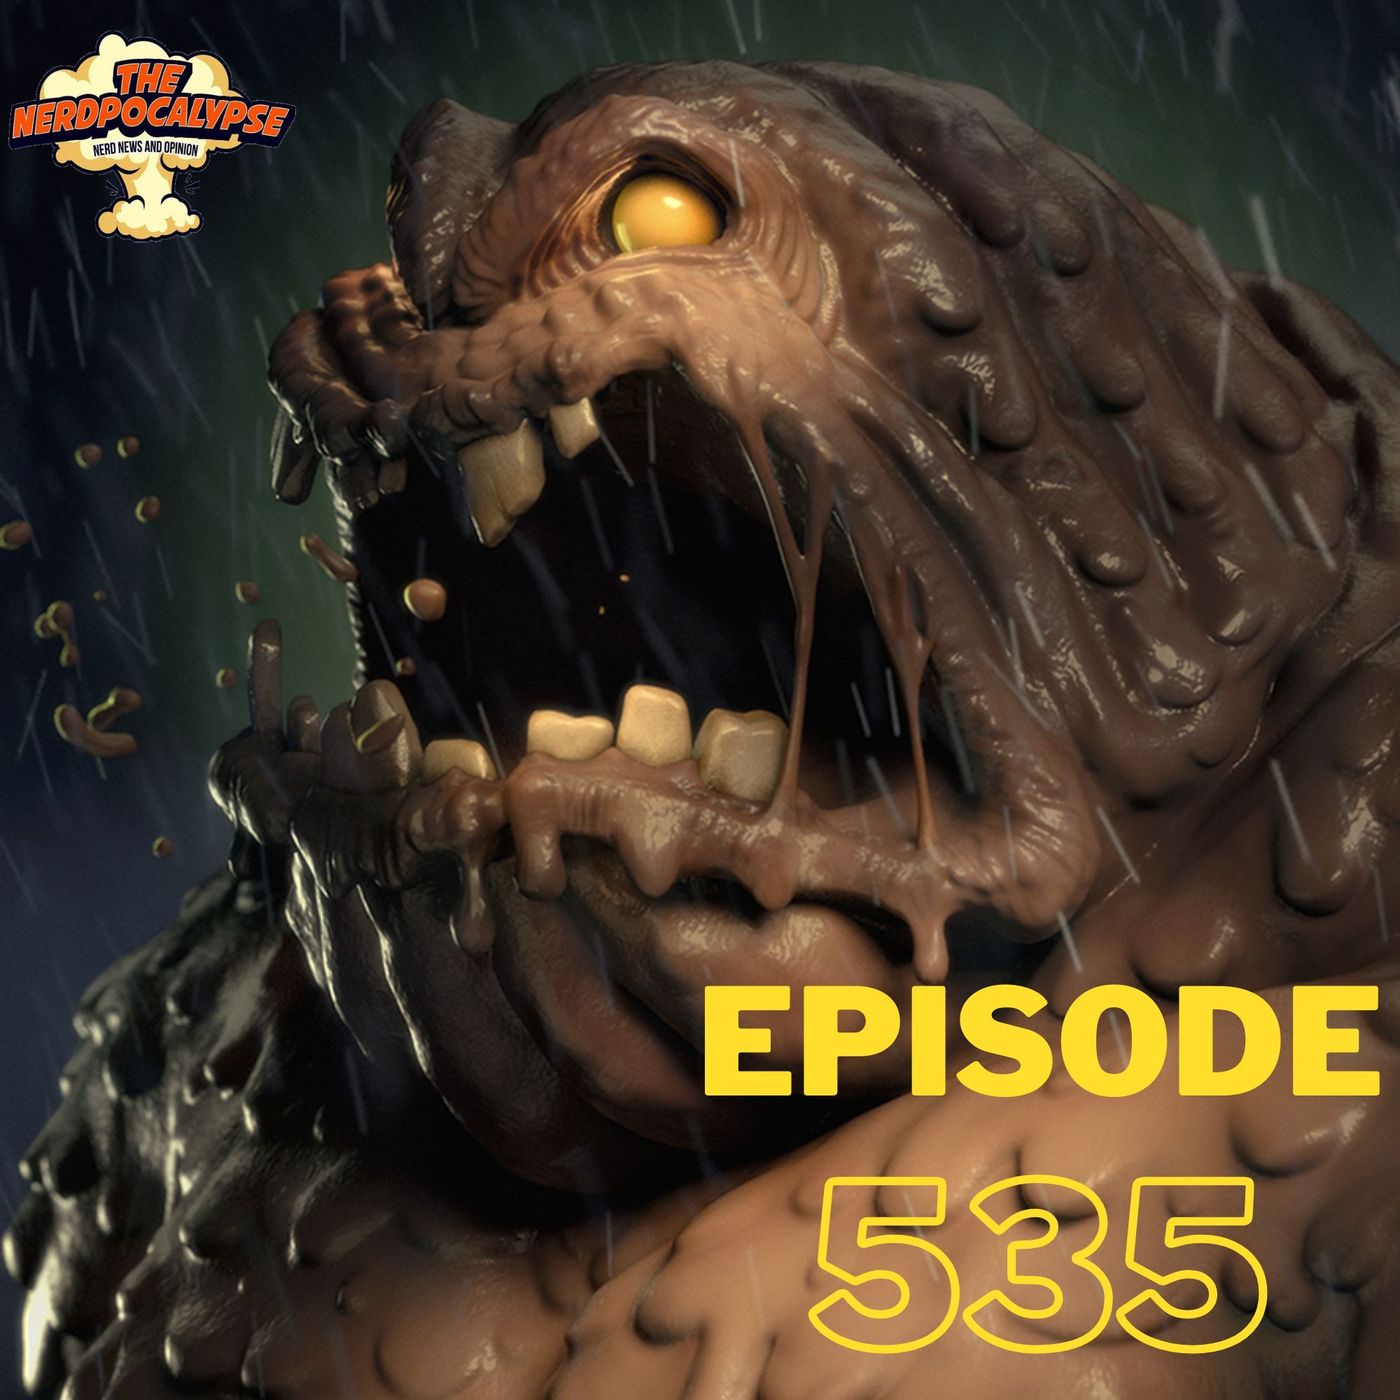 Episode 535: Bring Me the Mud Man! (Wakanda Forever Box Office, Superman sequel, & Creed 3)